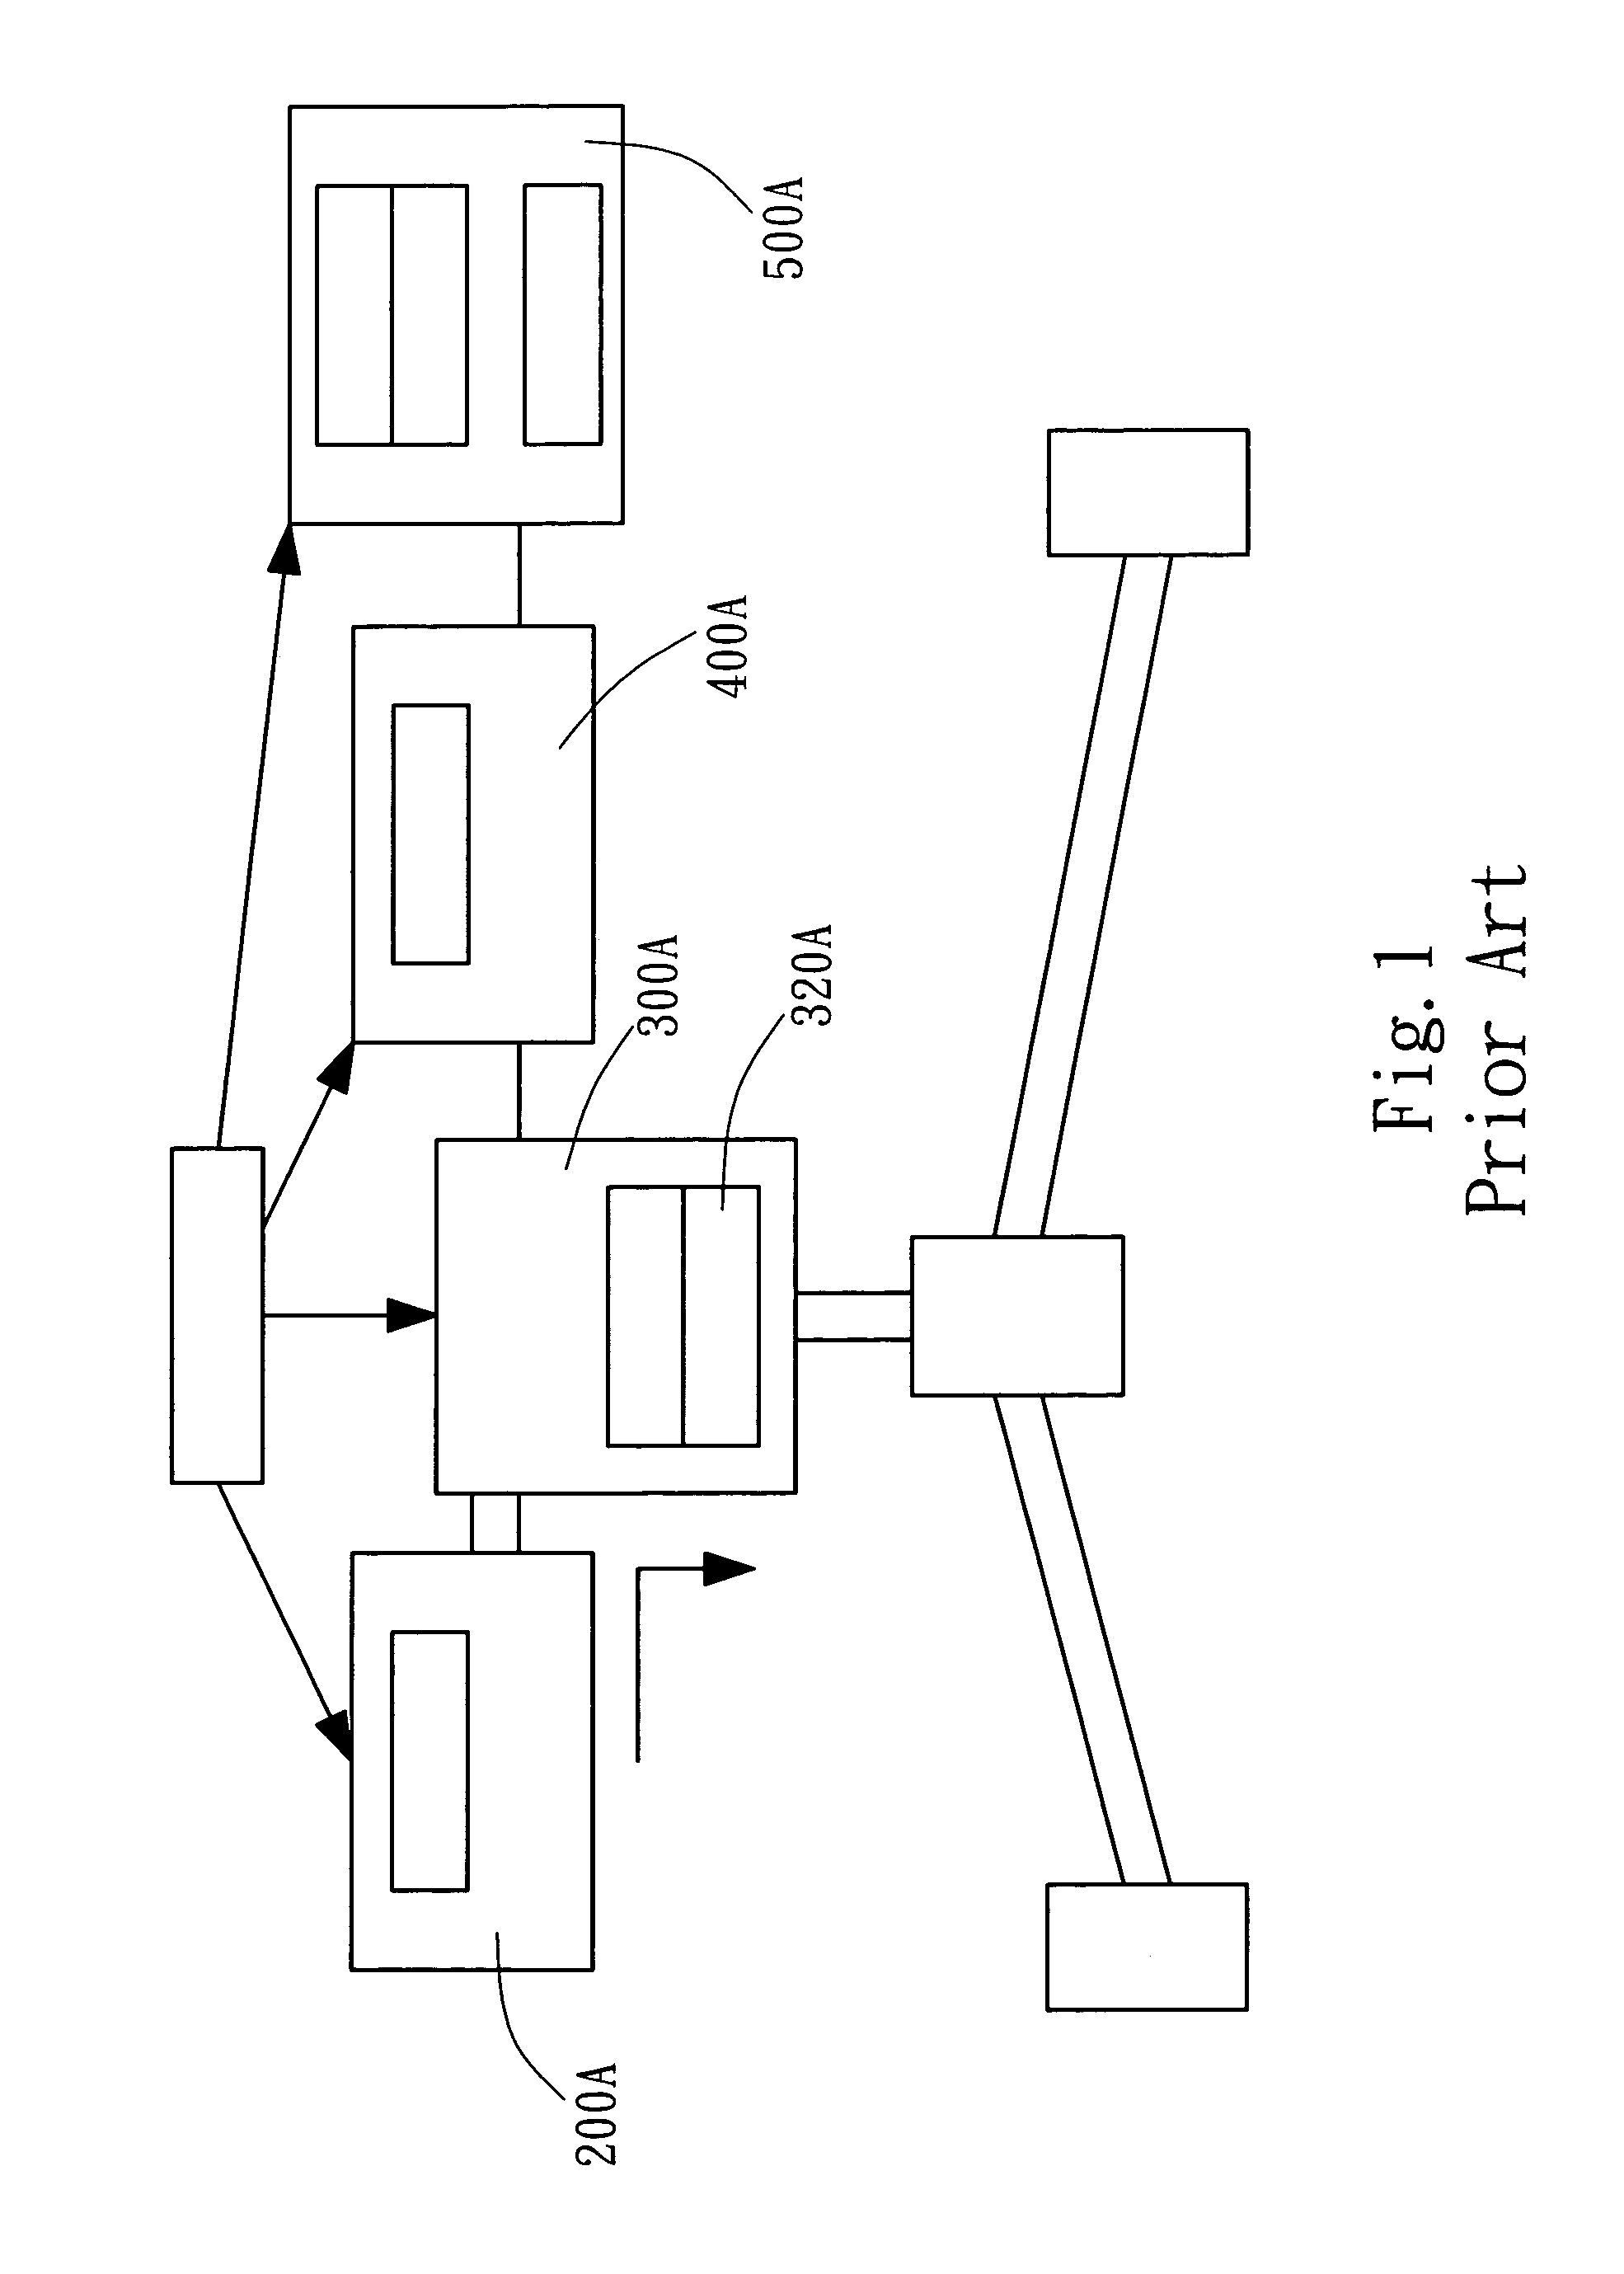 Hybrid system with a controllable function of variable speed transmission